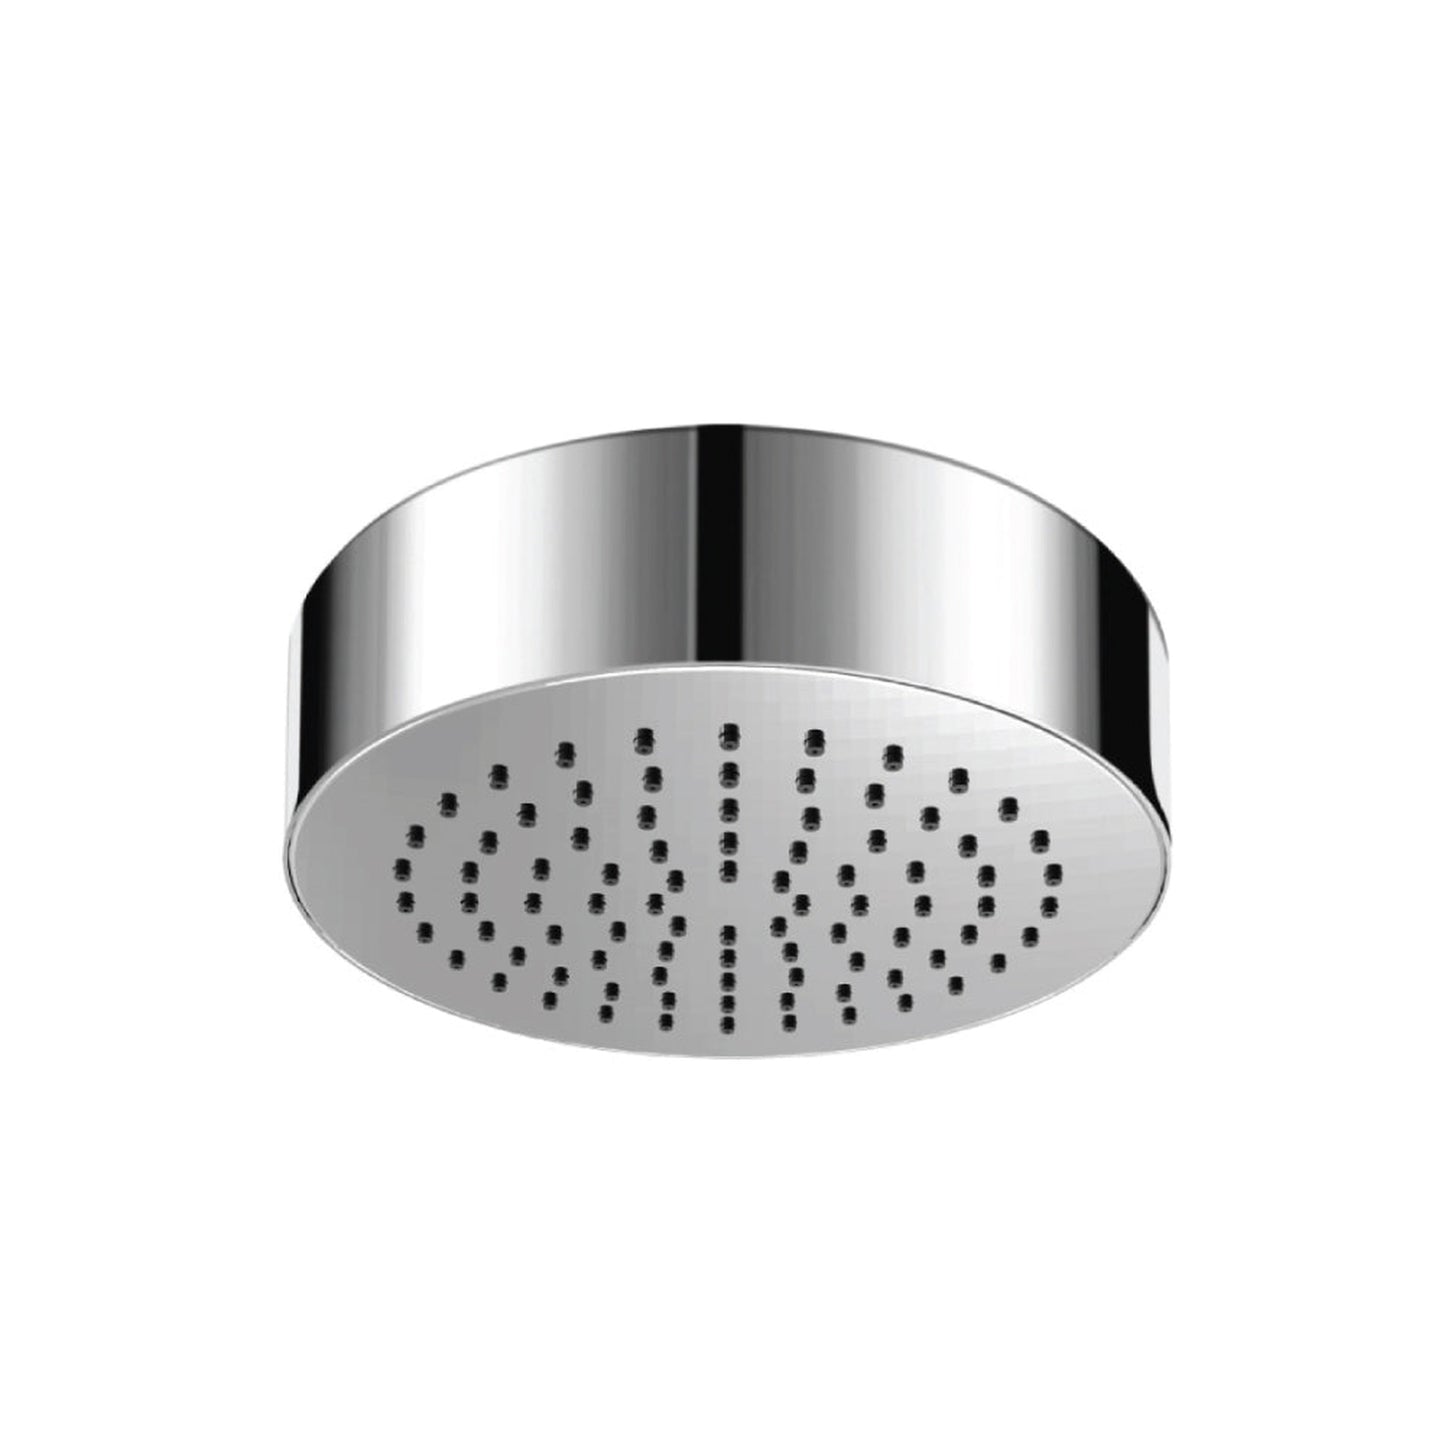 Isenberg Universal Fixtures 7" Single Function Round Brushed Nickel PVD Solid Brass Rain Shower Head